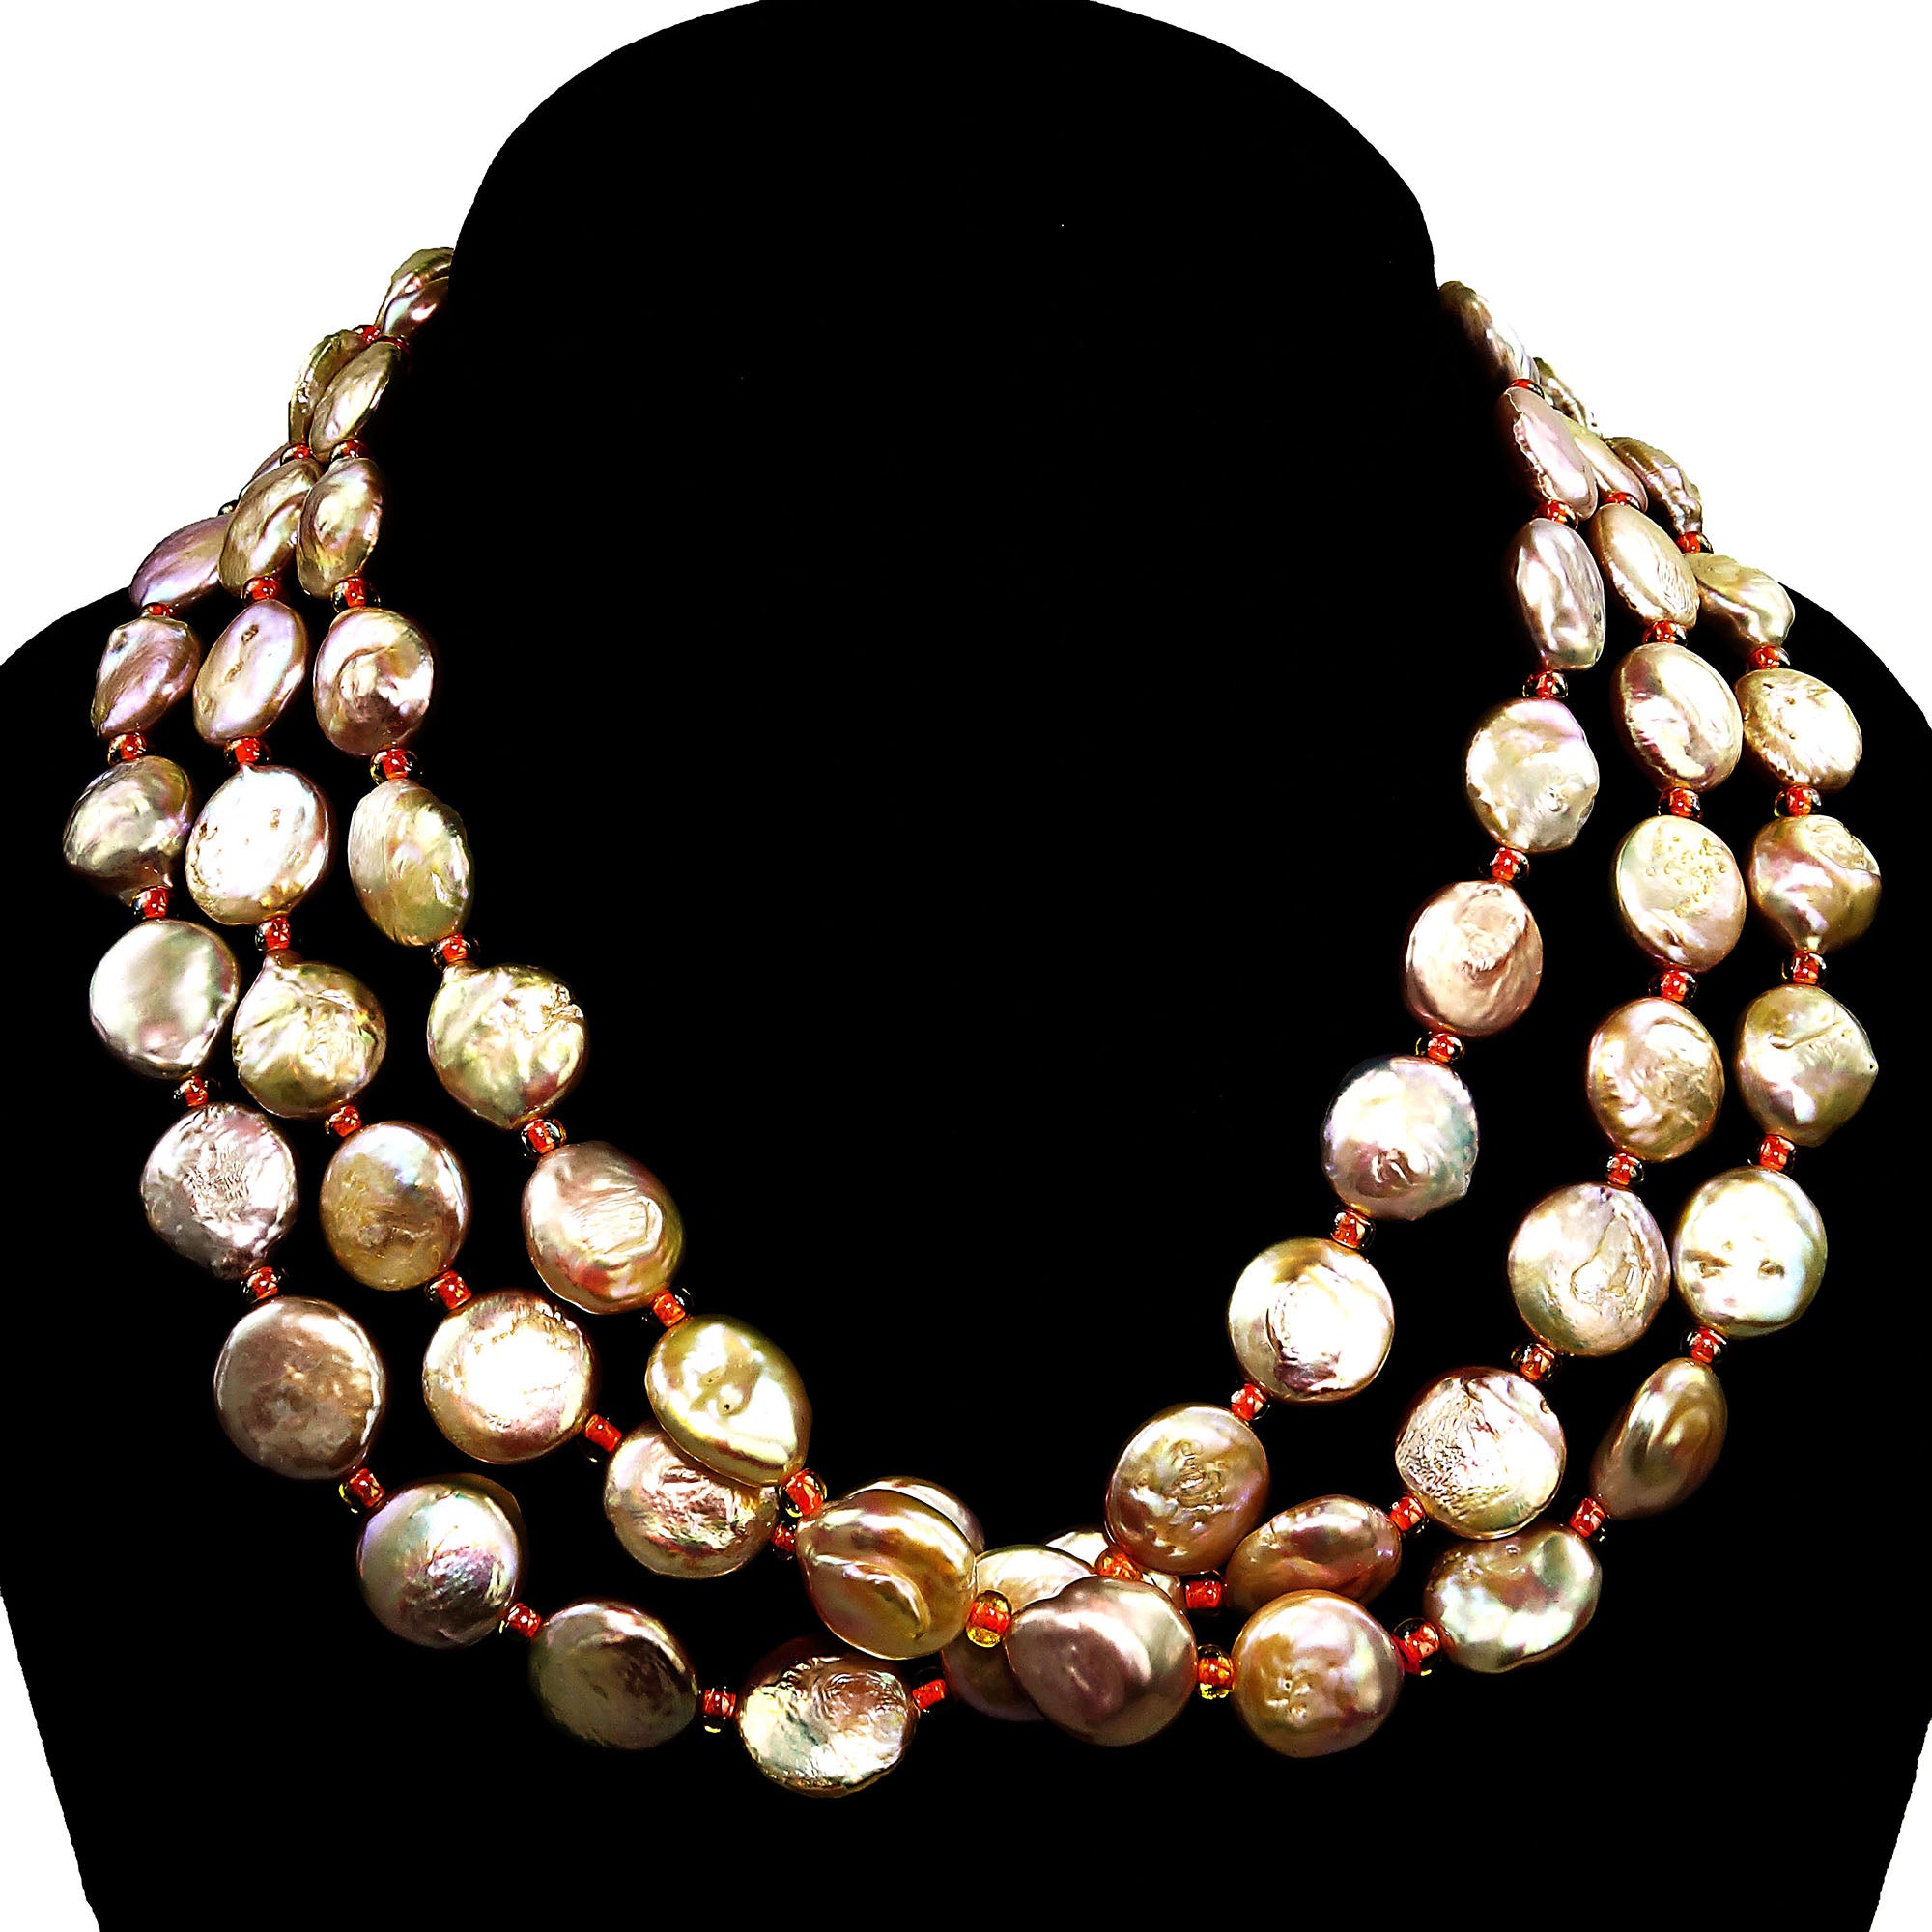 AJD Triple Strand Coin Pearl Necklace in Peachy/Pink June Birthstone  Great Gift